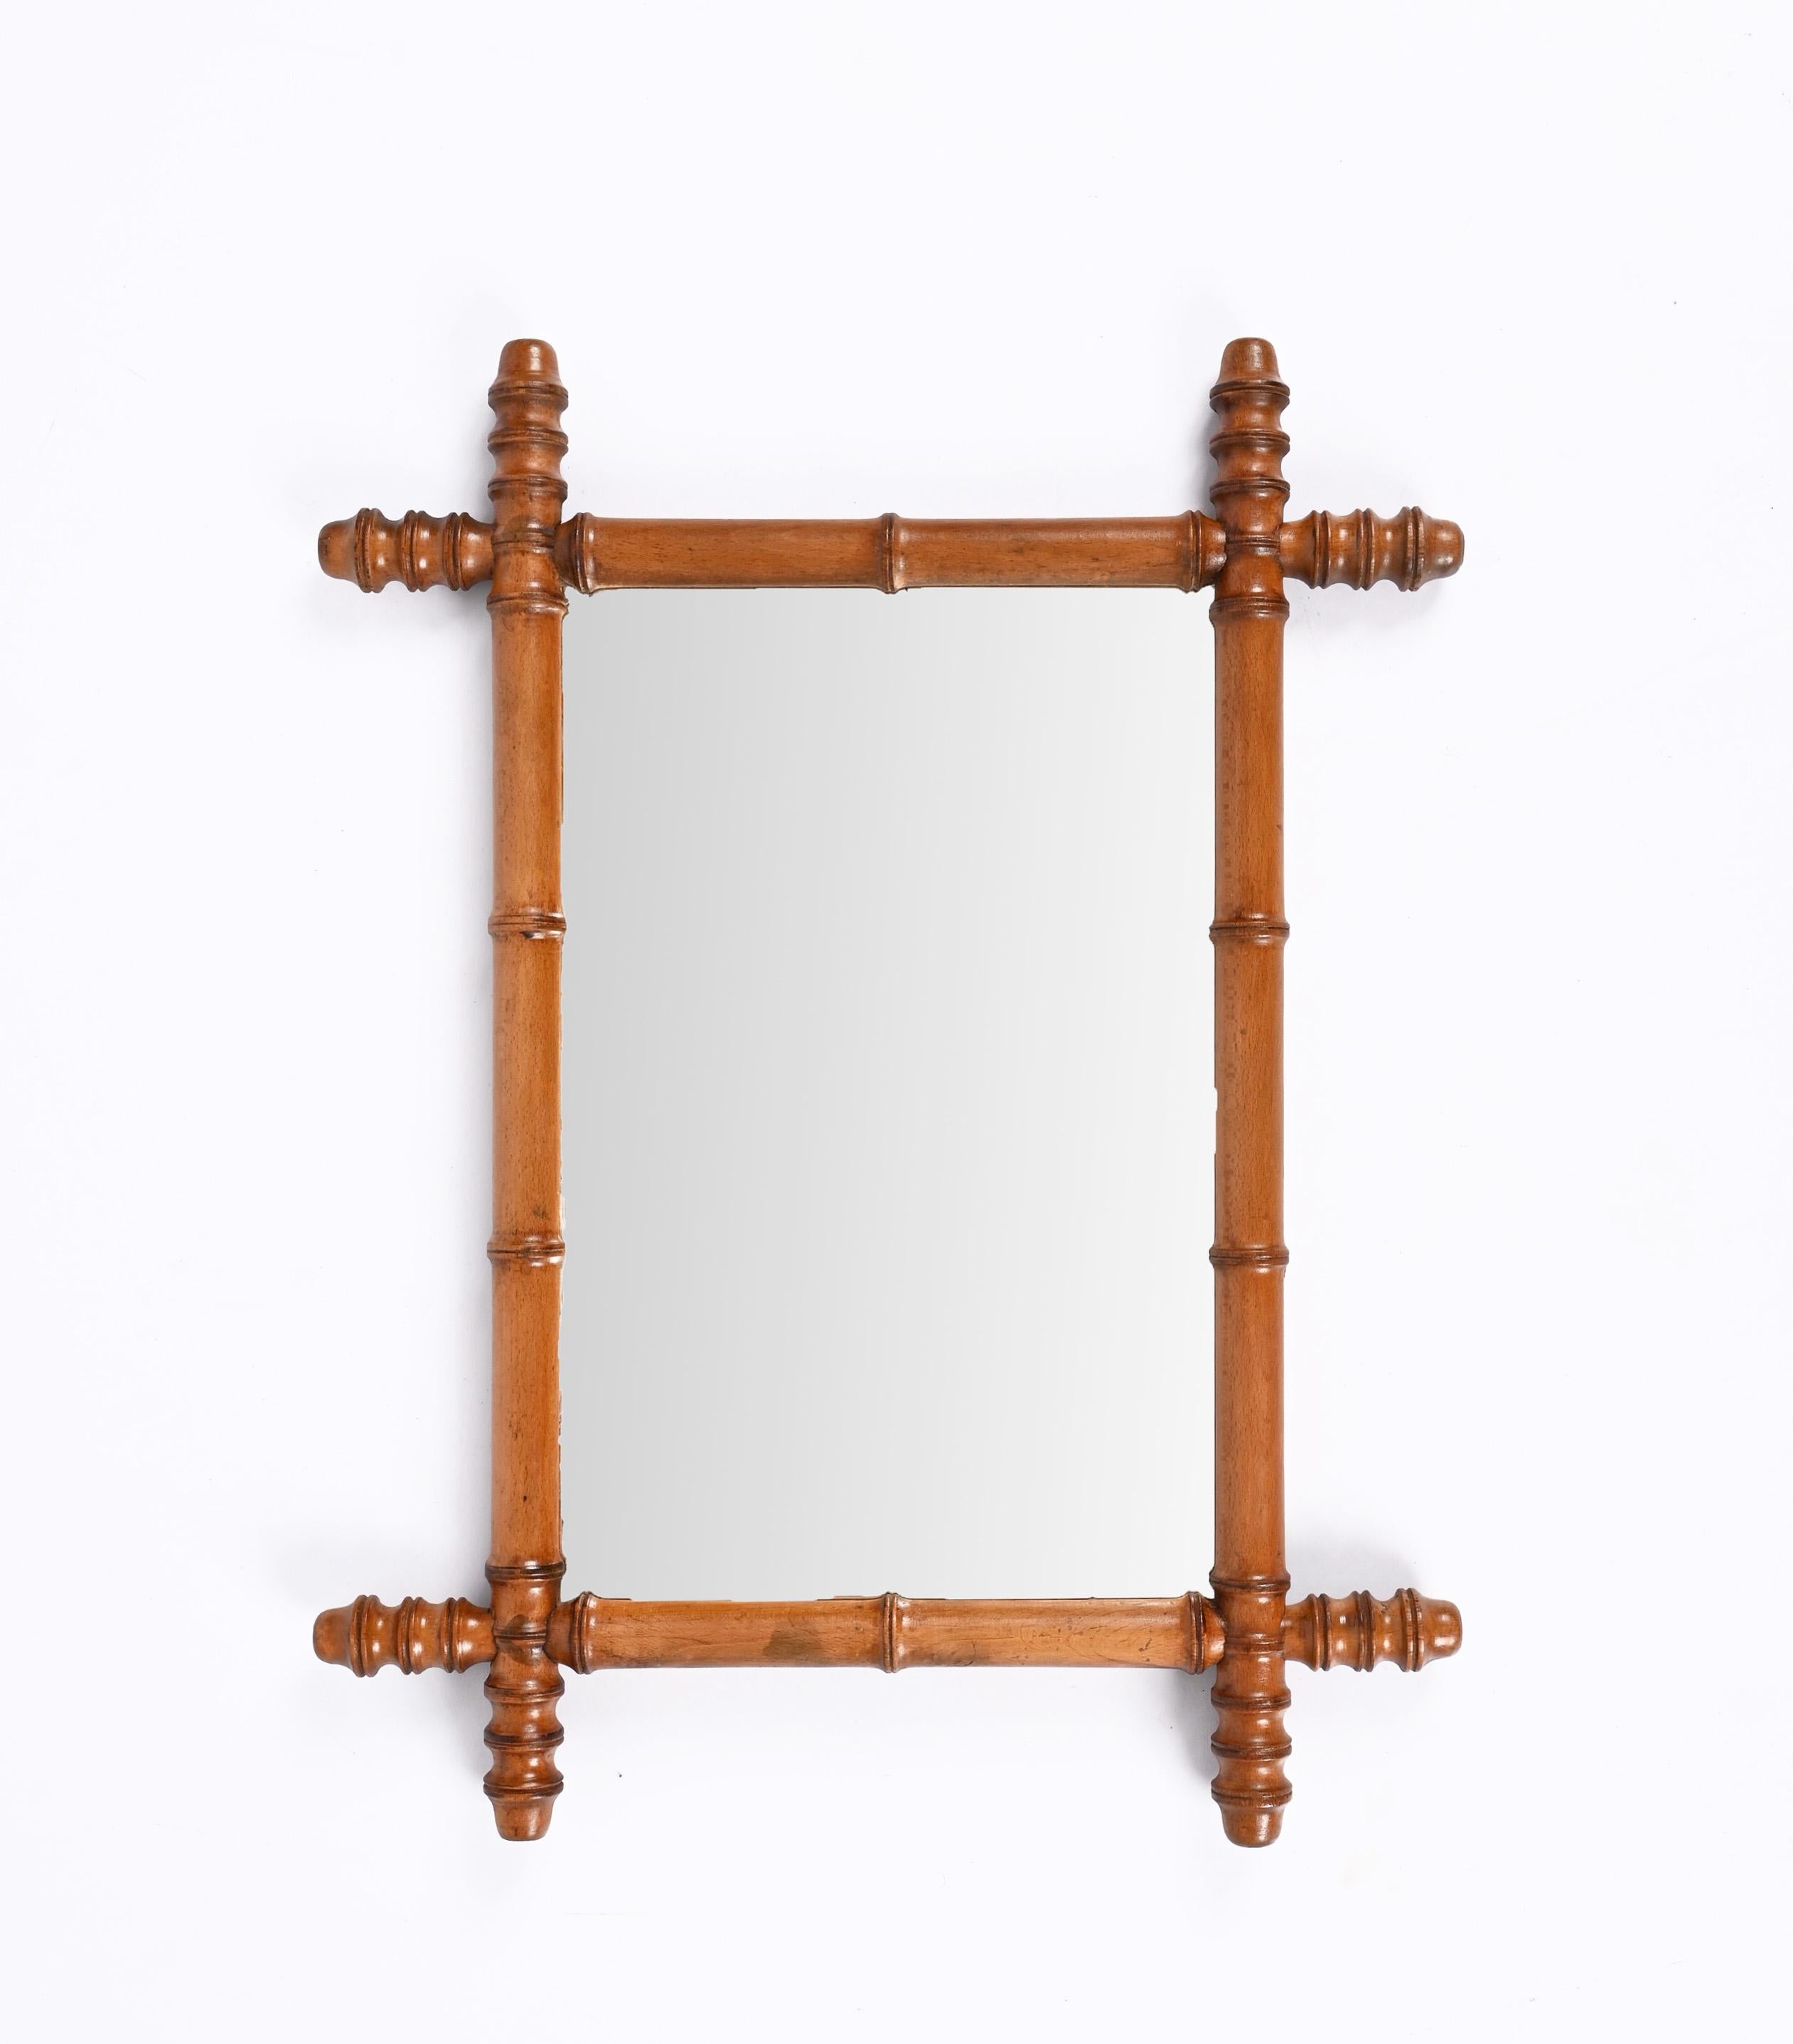 Early 20th century Art Nouveau mirror with beech faux bamboo frame. This wonderful item was produced in France in the 1900s.

This piece is very attractive thanks to the patina of glass plate and the faux bamboo frame, made of beech.

With its